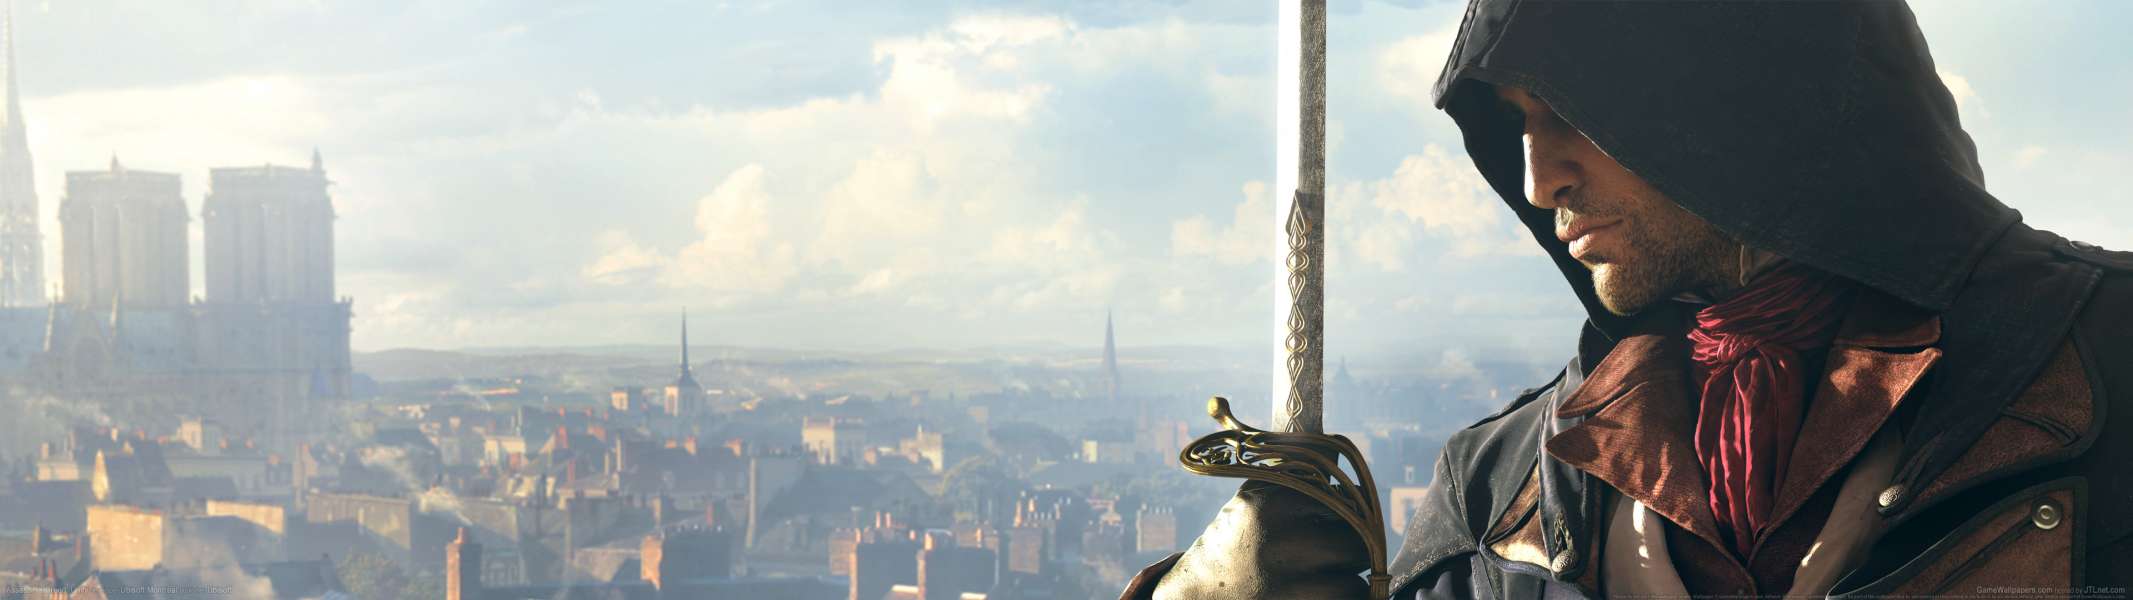 Assassin's Creed: Unity dual screen wallpaper or background